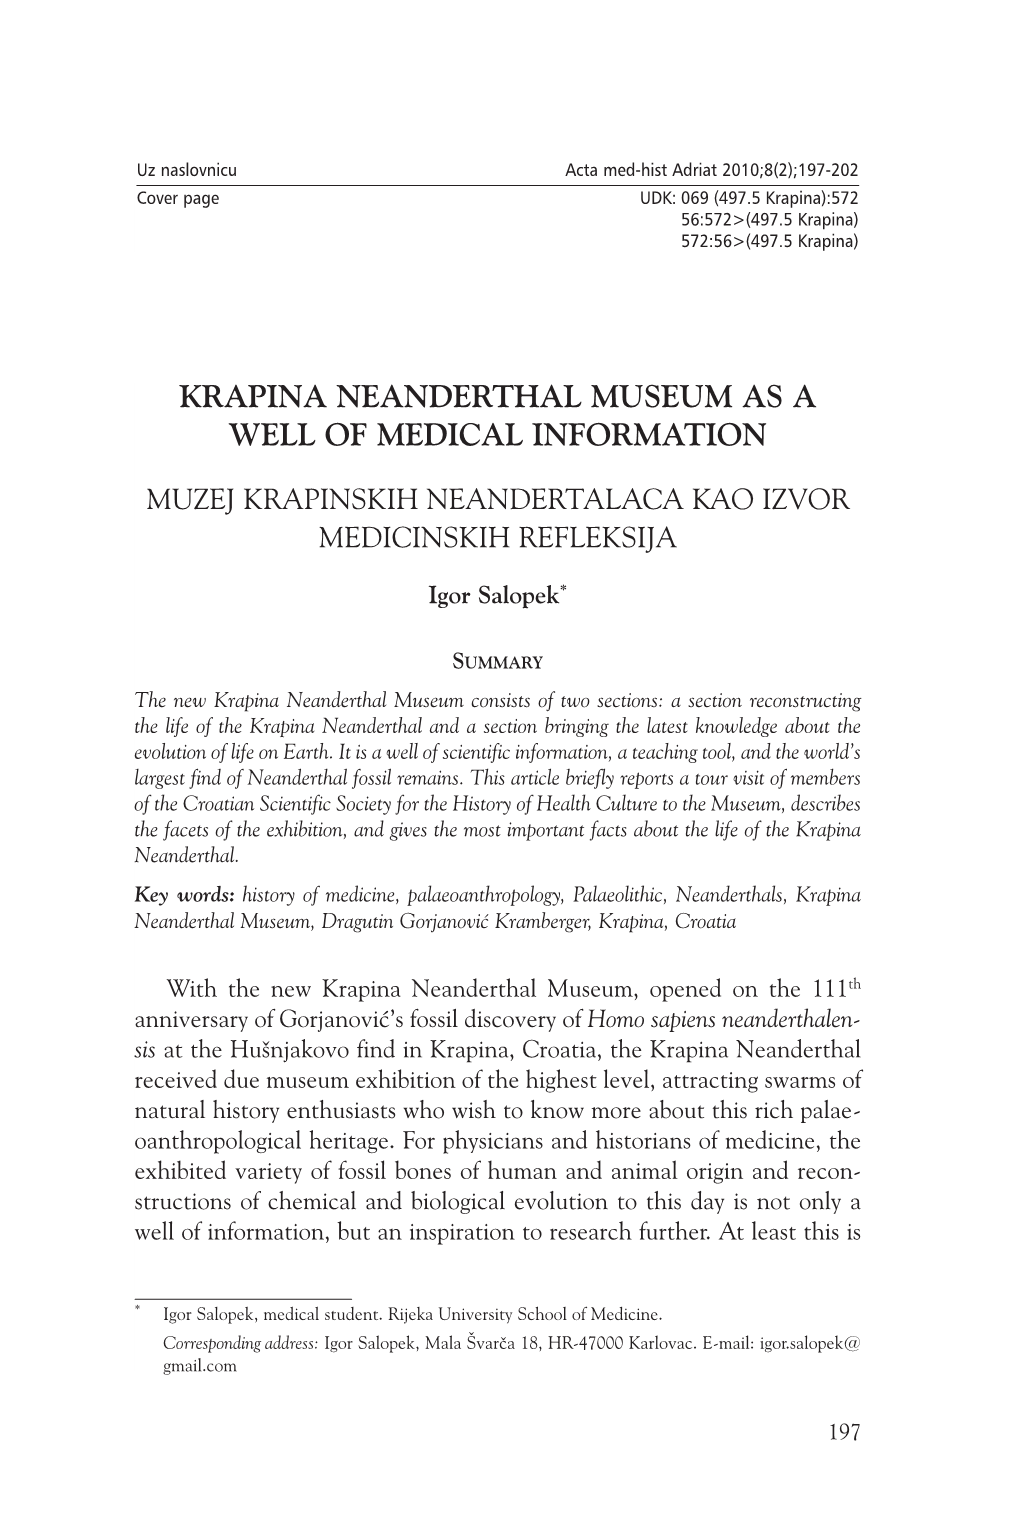 Krapina Neanderthal Museum As a Well of Medical Information